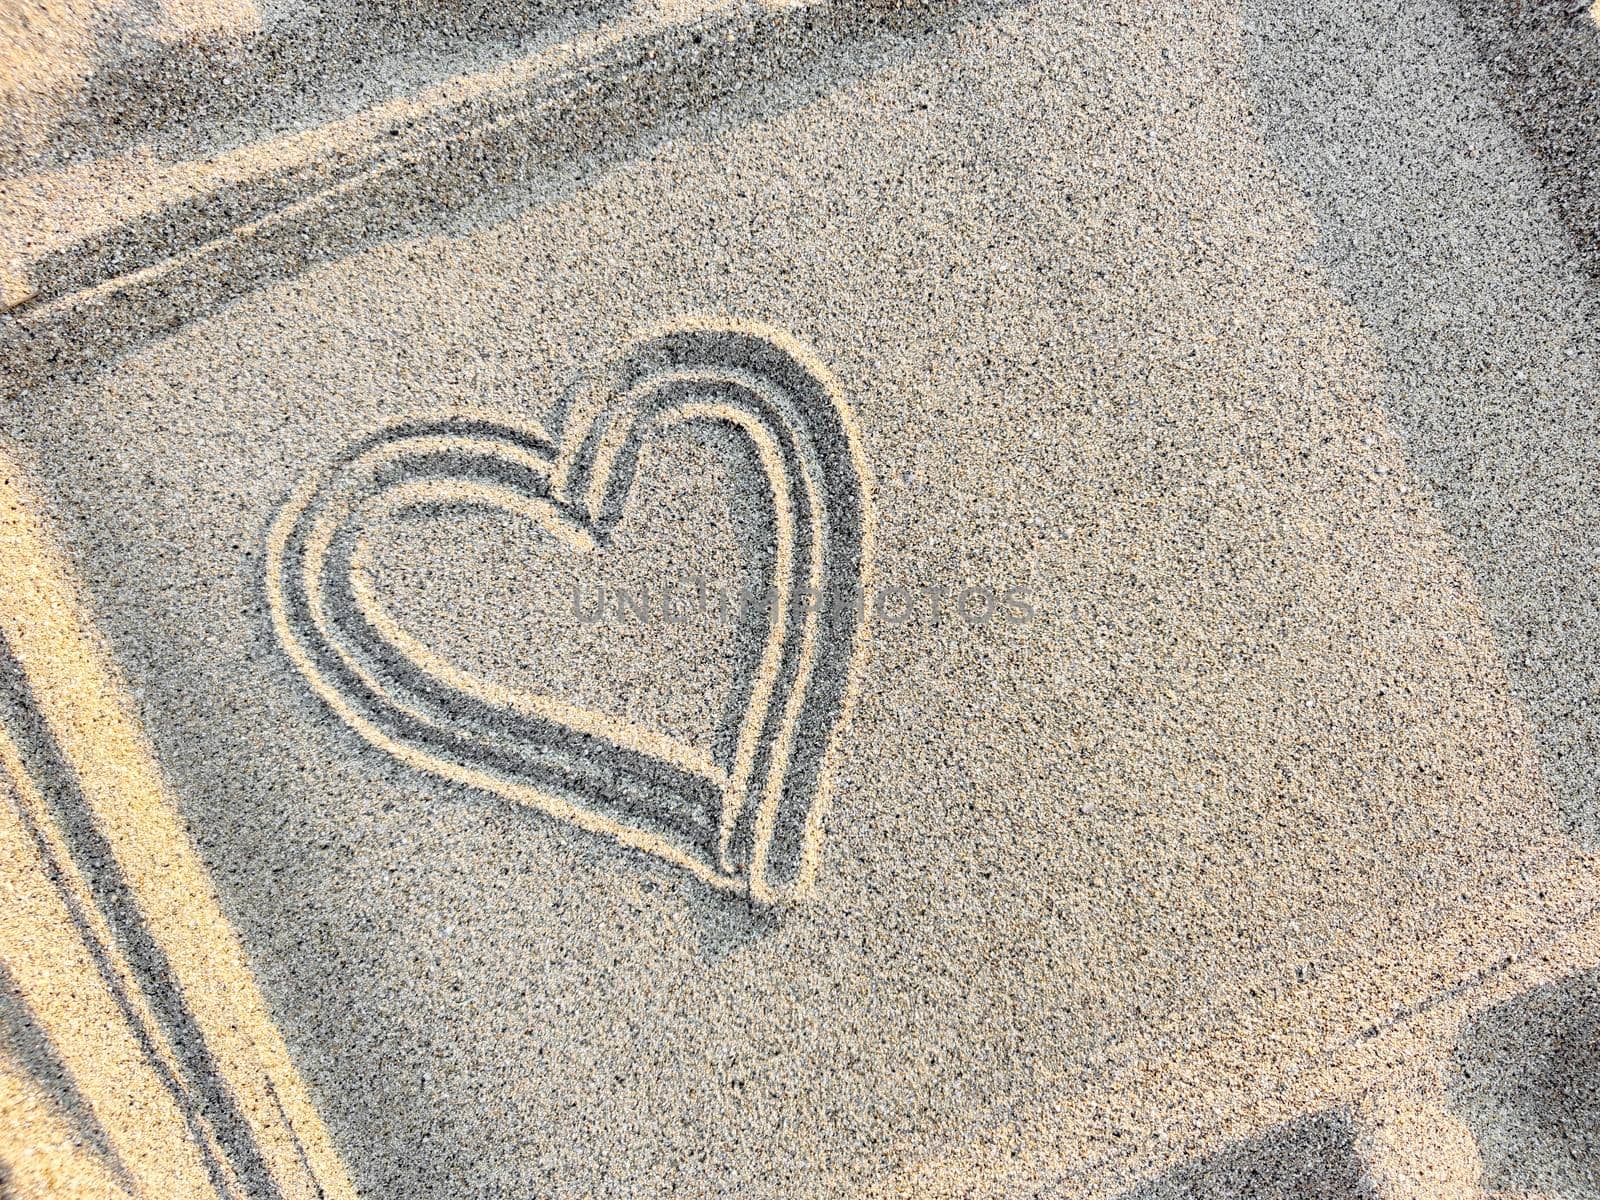 Heart drawn on sand in frame, top view, close-up. Copy space. by Laguna781